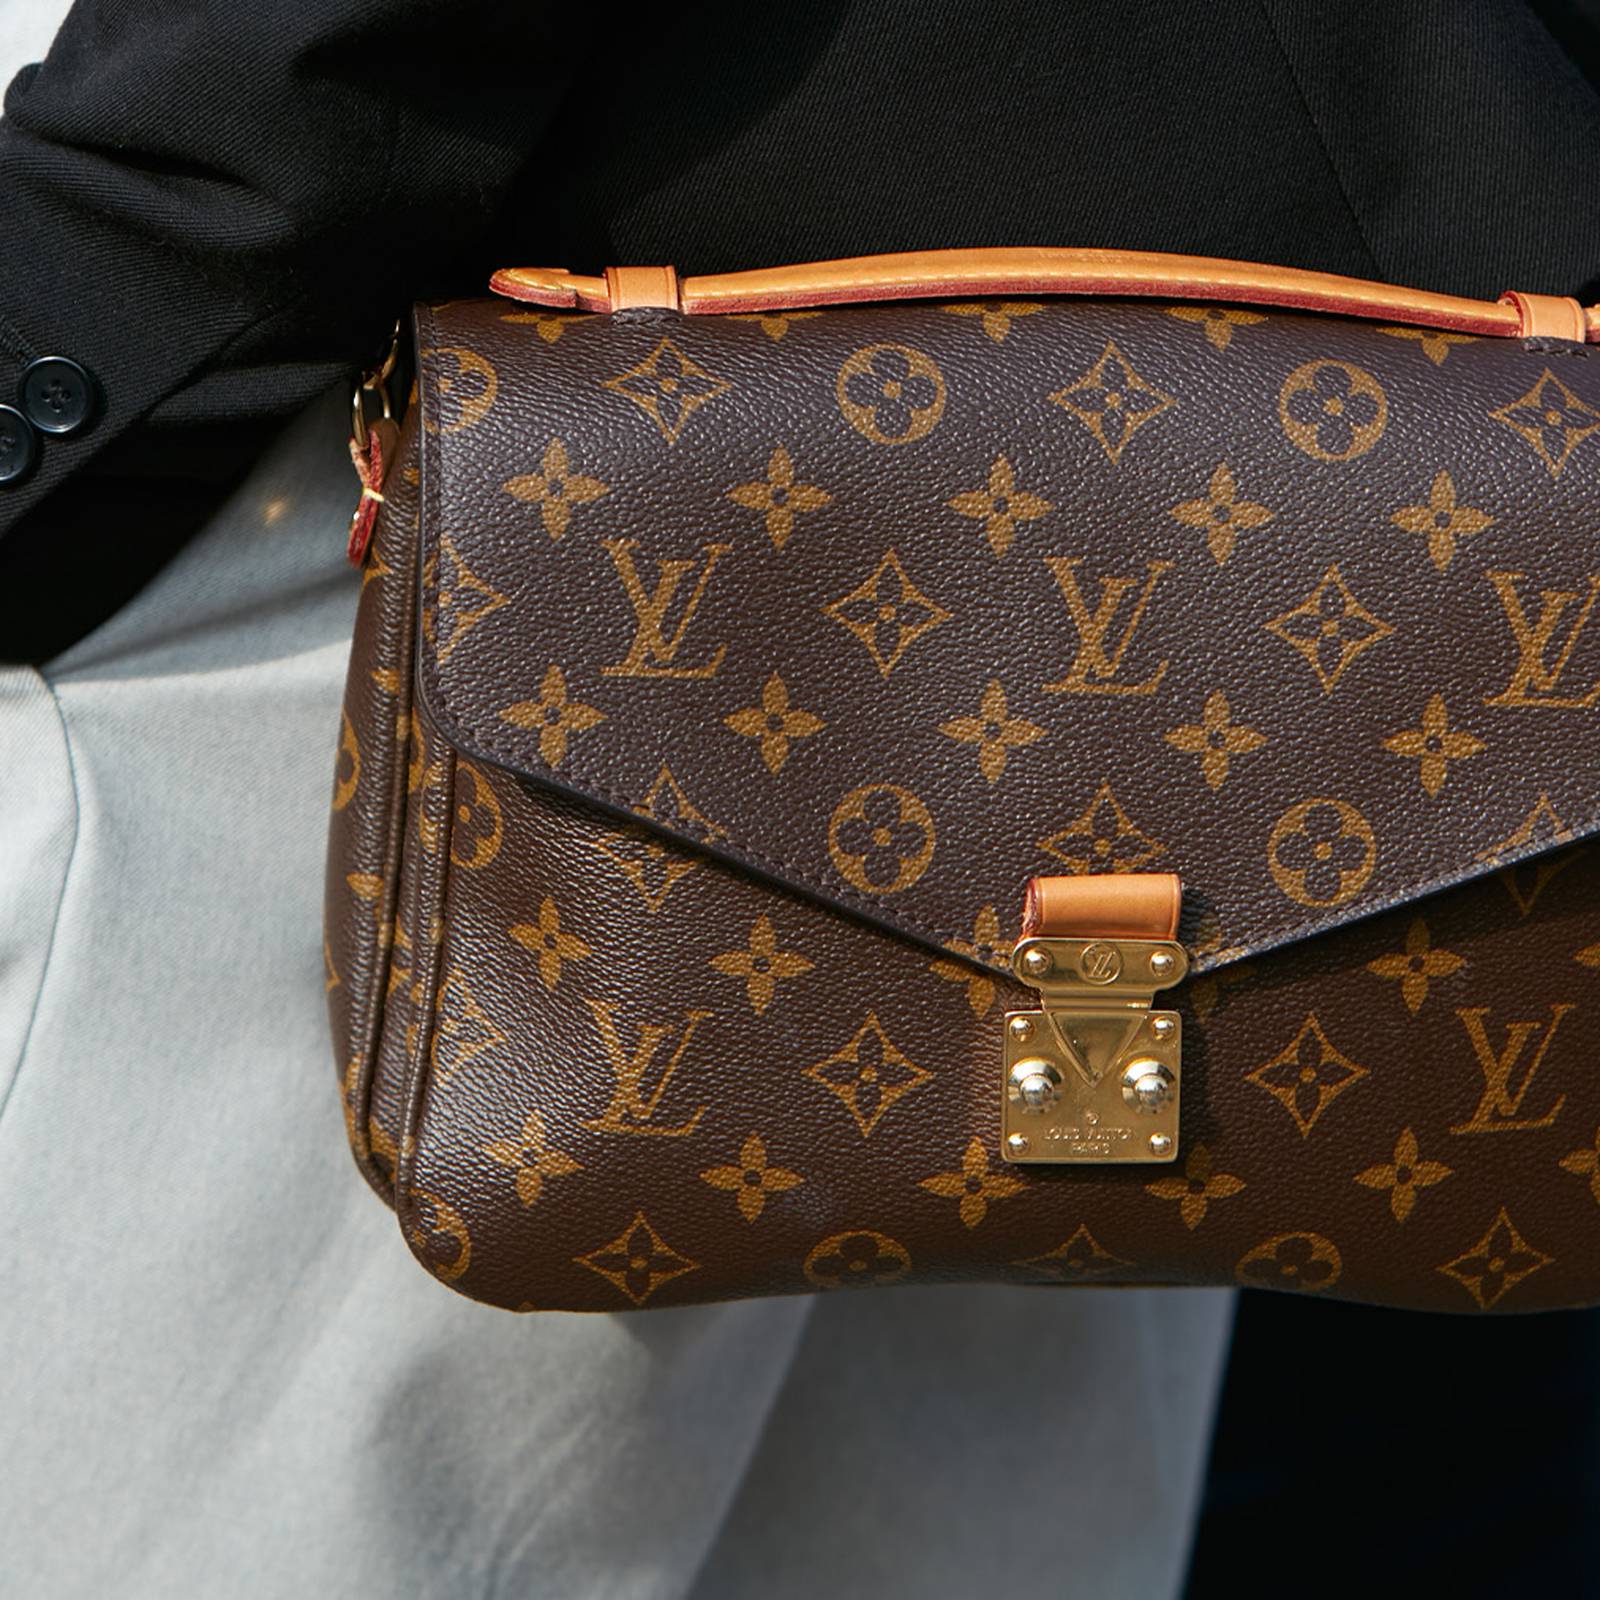 Louis Vuitton Factory Workers in France Stage Walkout, Demand Higher Pay